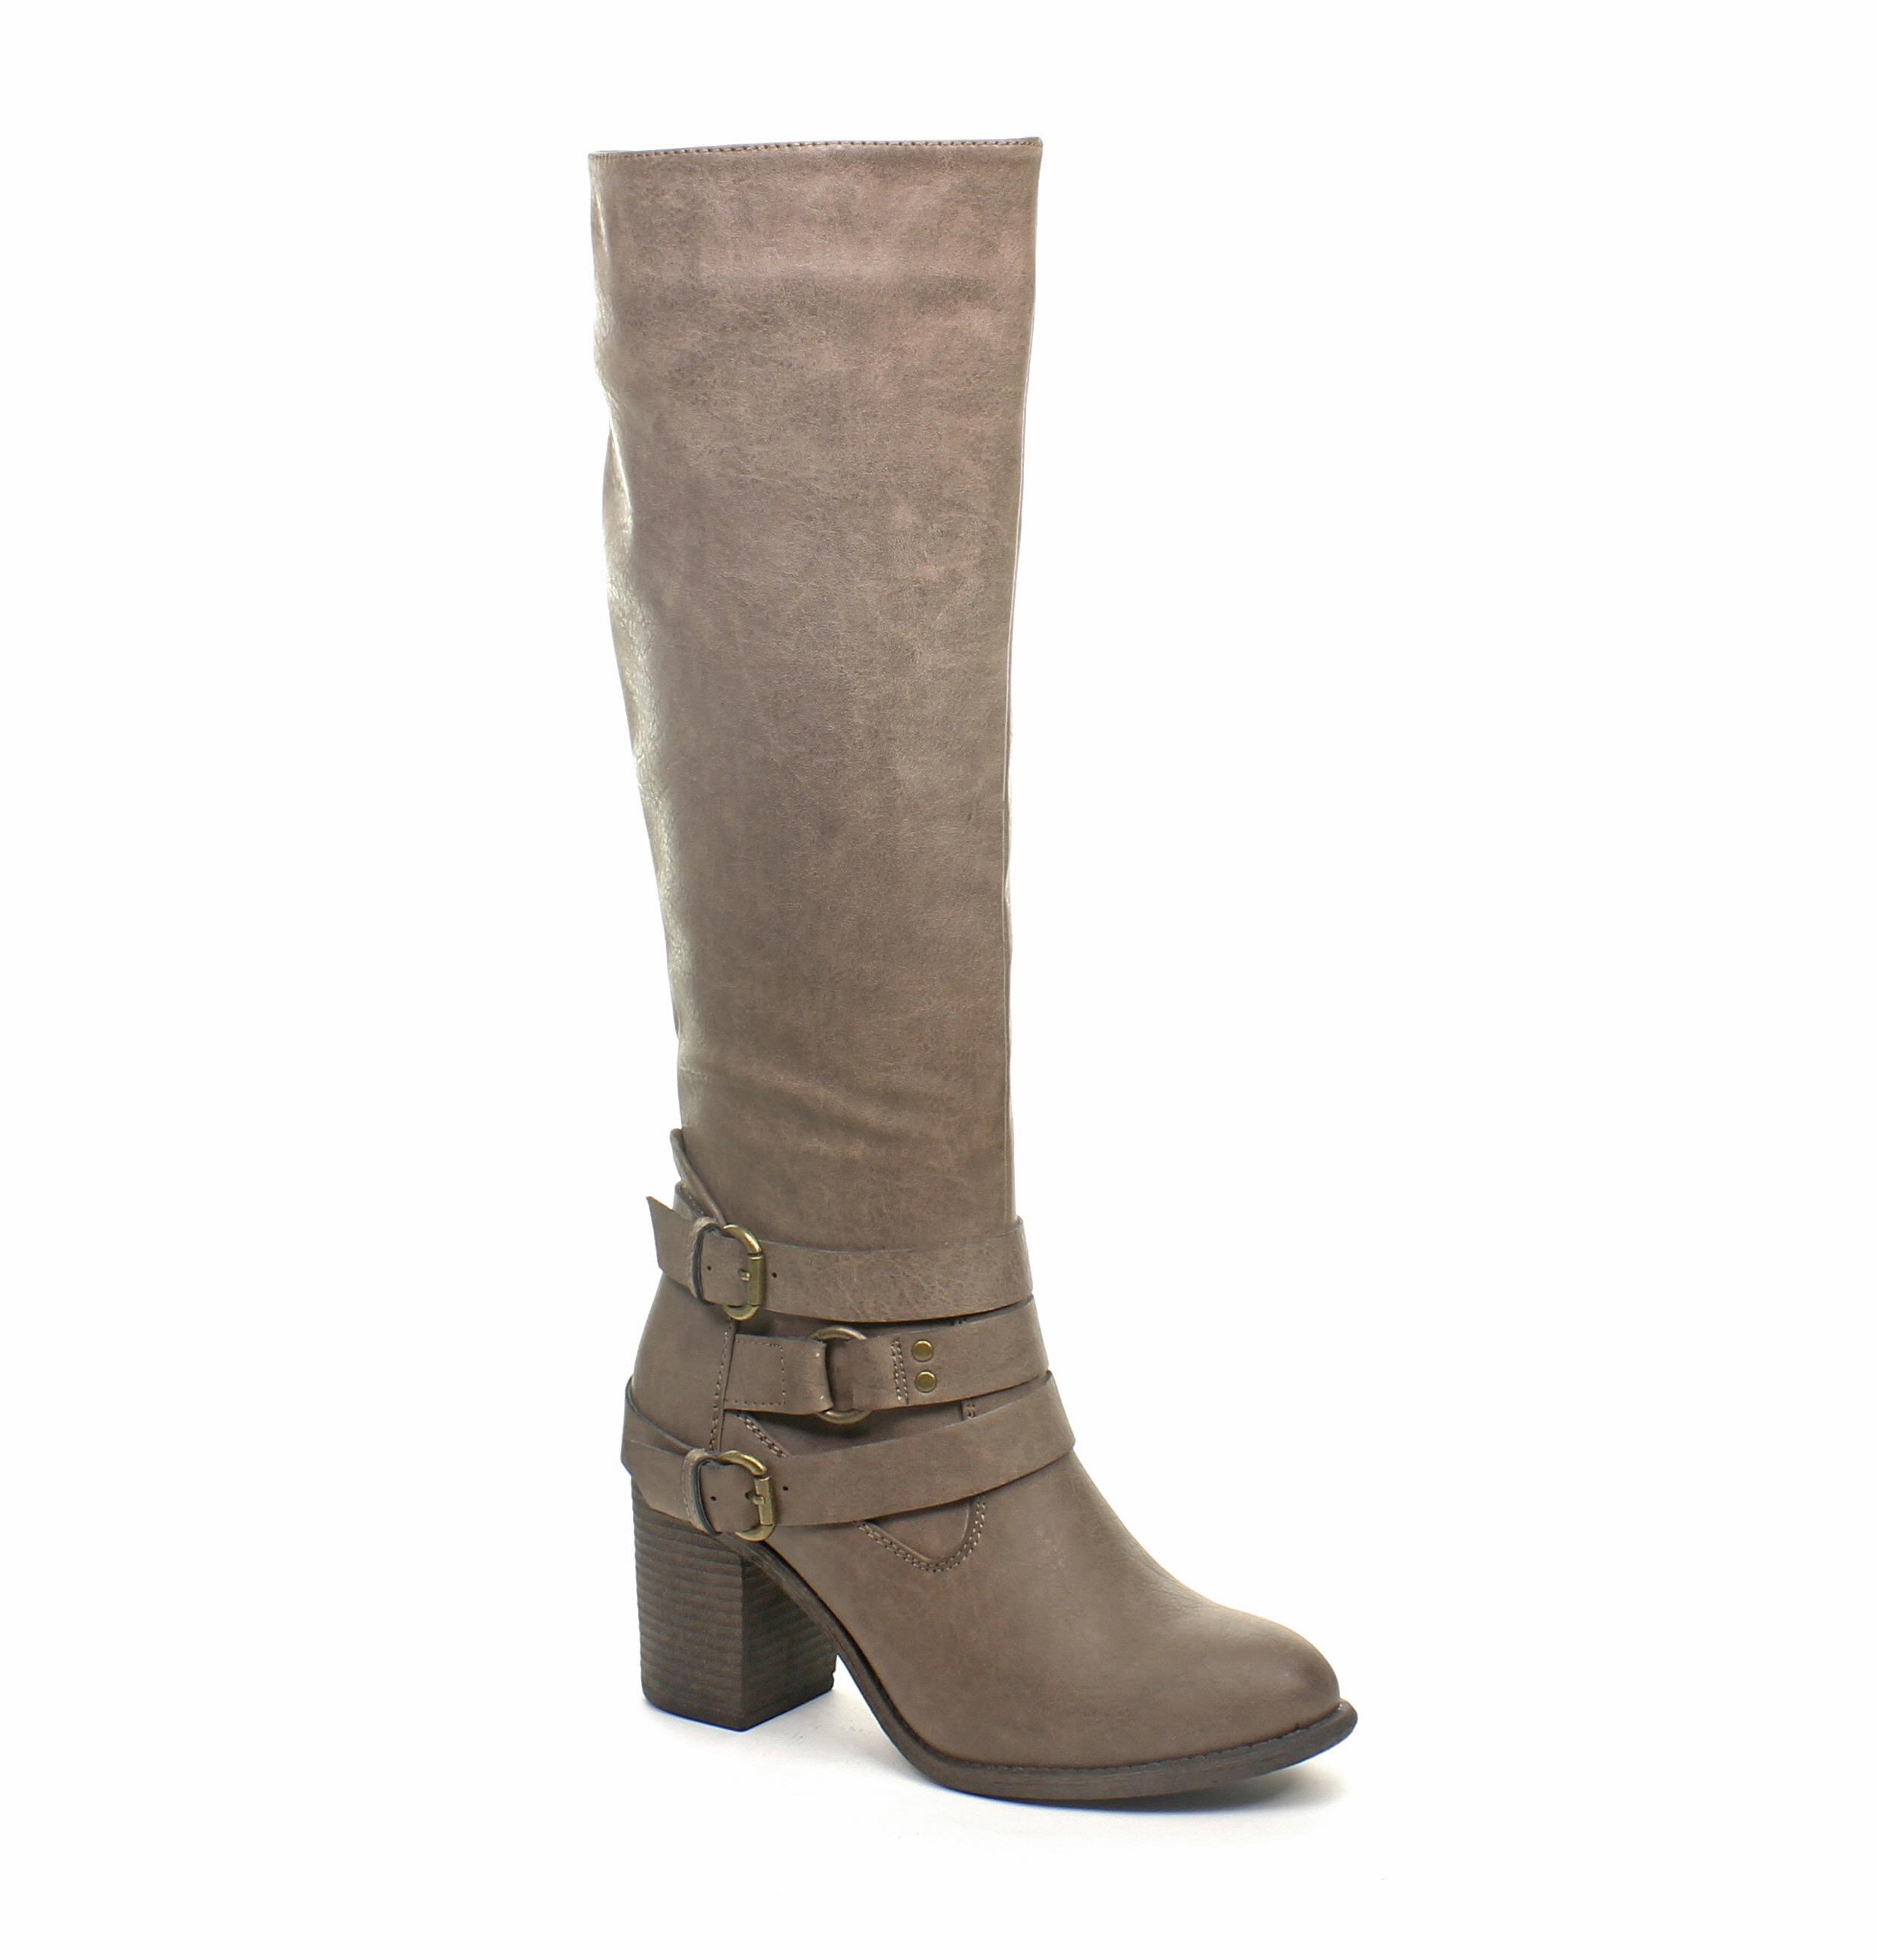 Bottes taupe- Shoe Discount - 49,99 €